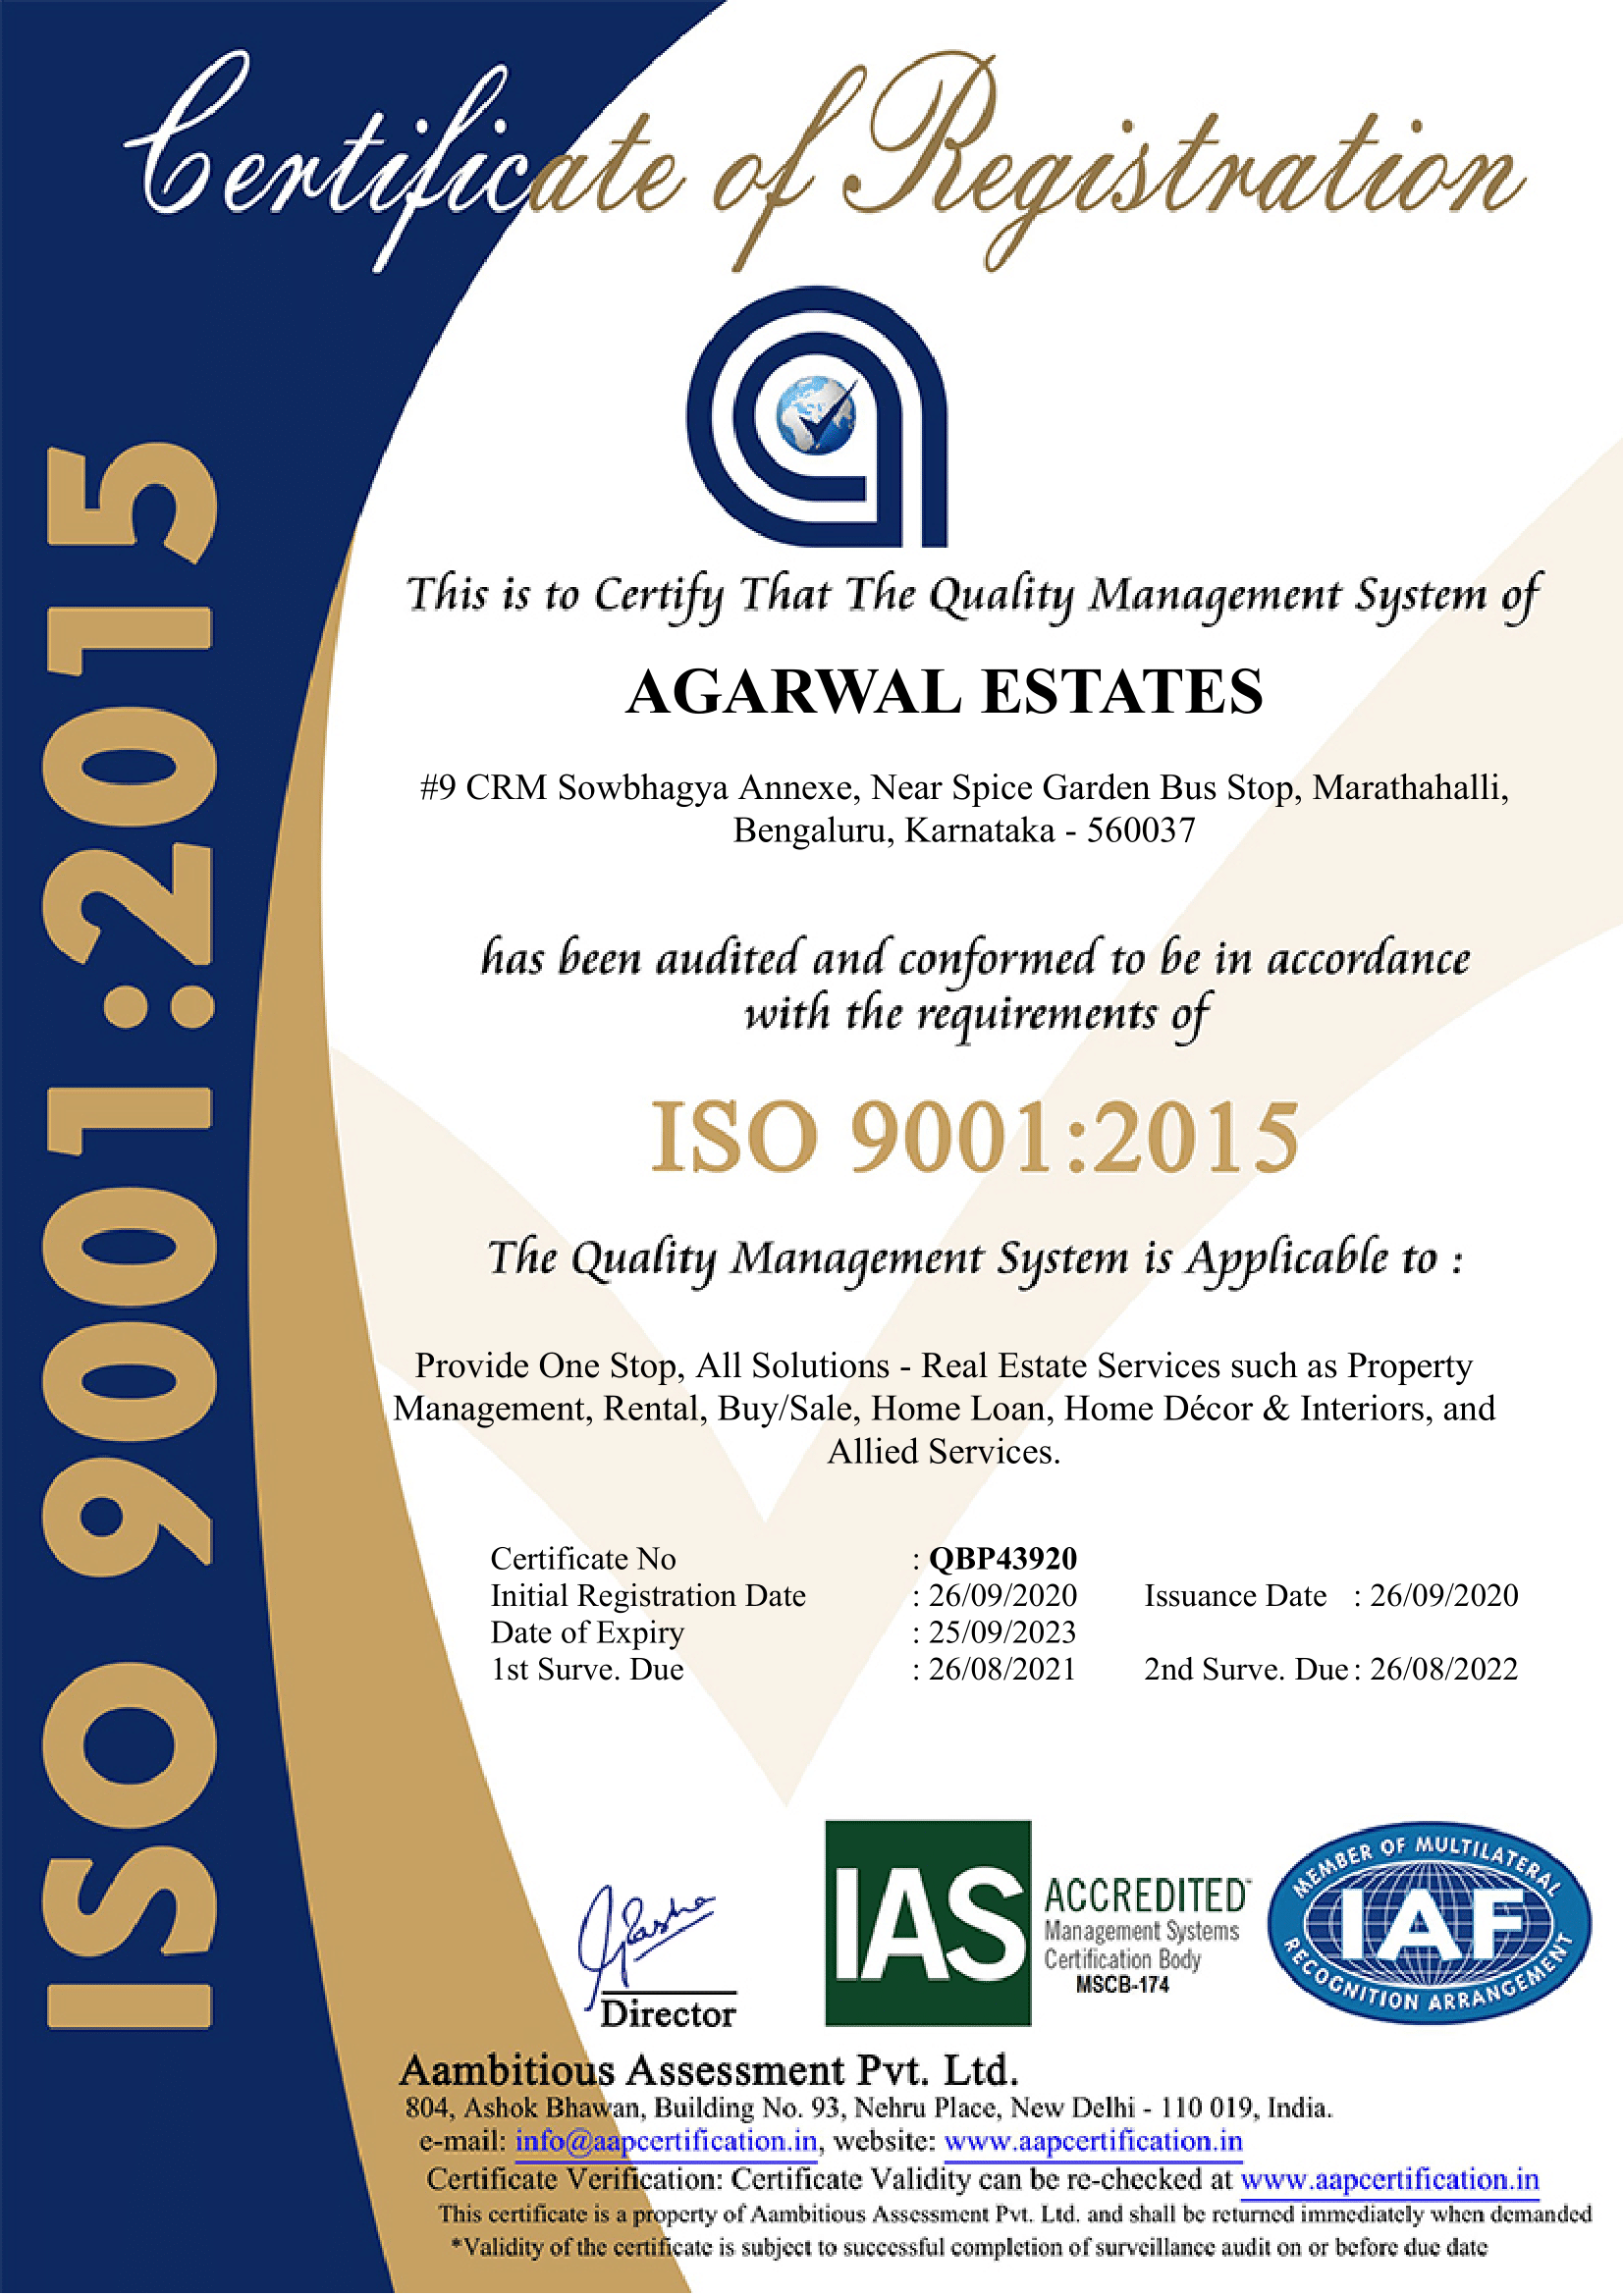 Agarwal Estates is now ISO 9001:2015 certified!